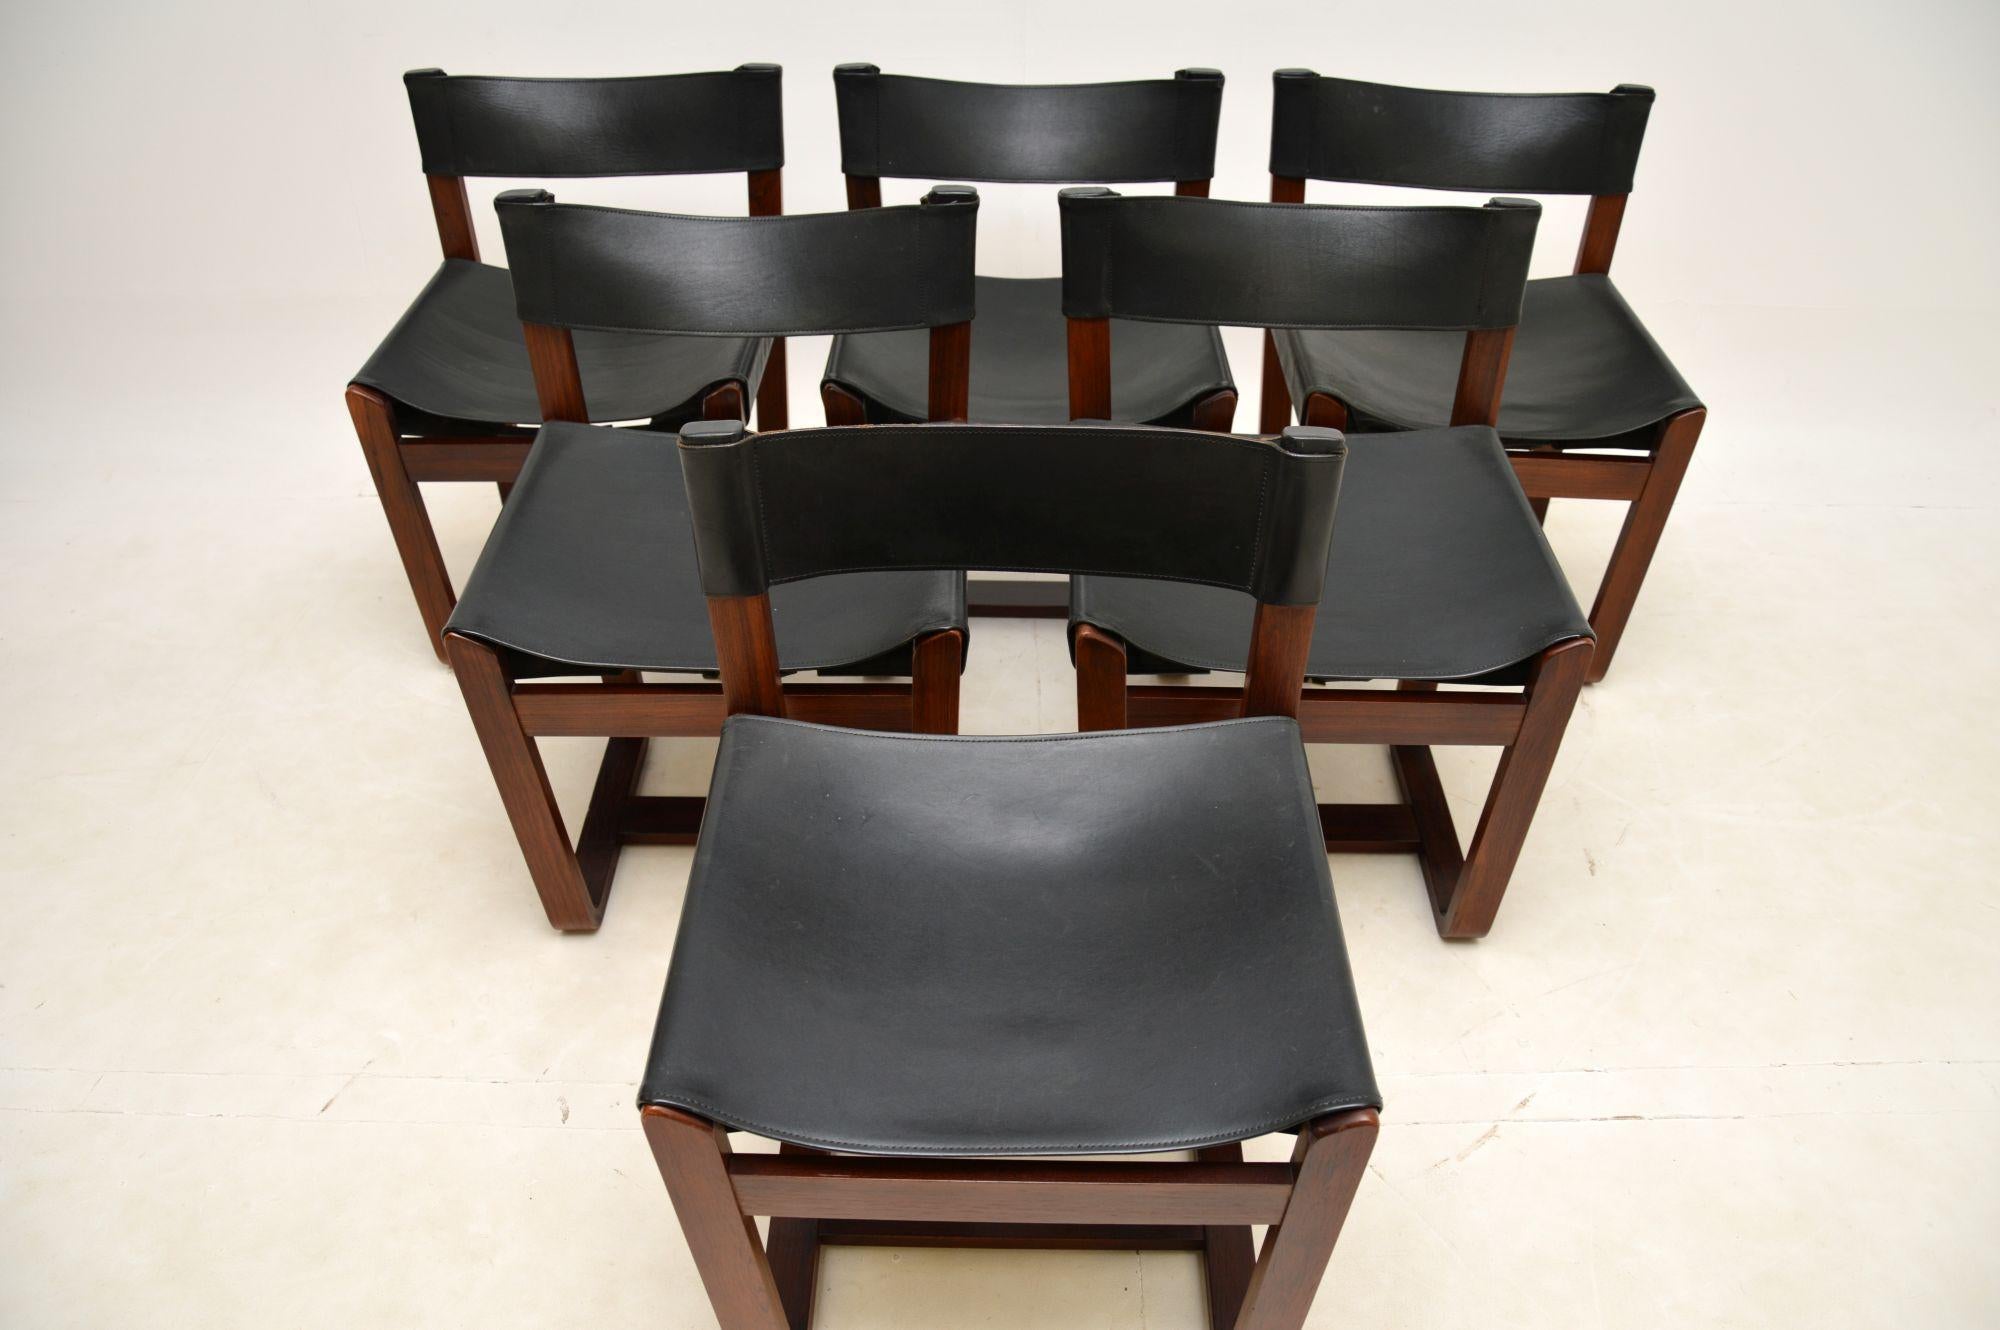 A stylish and very well made set of six dining chairs. They were designed by Gunther Hoffstead and were made in England by Unilfex in the 1960s.

They have an unusual and striking design, with beautiful frames and strapped thick leather